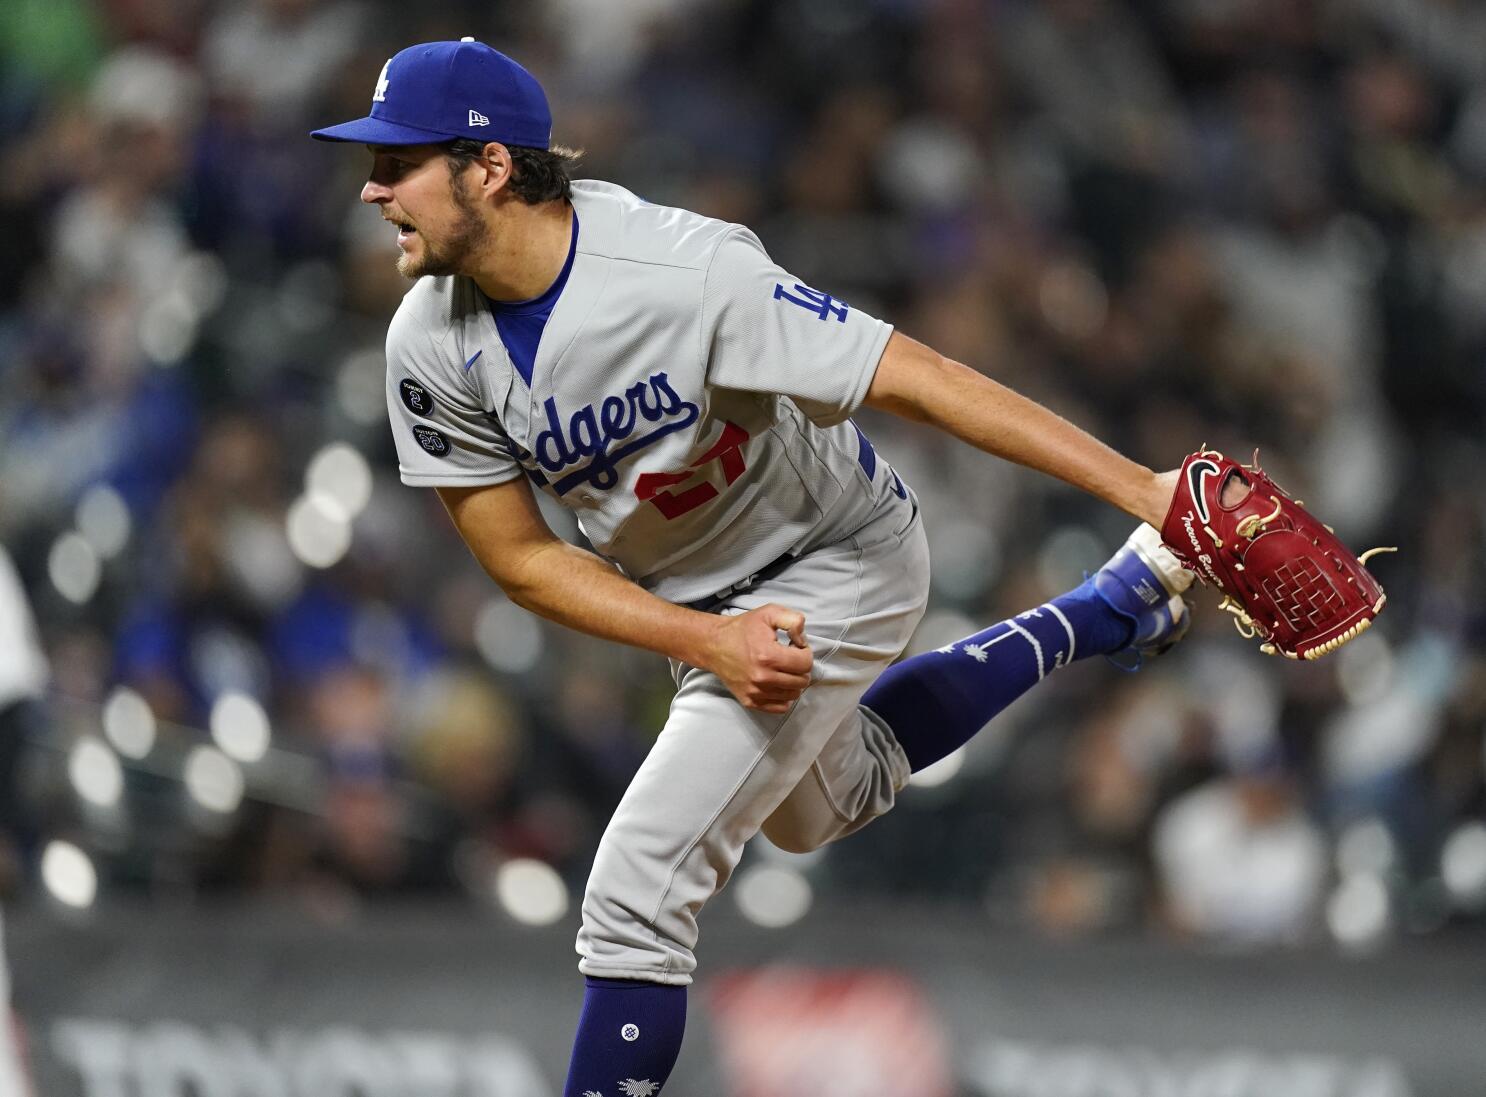 Los Angeles Dodgers: A great pitching duel set for Memorial Day